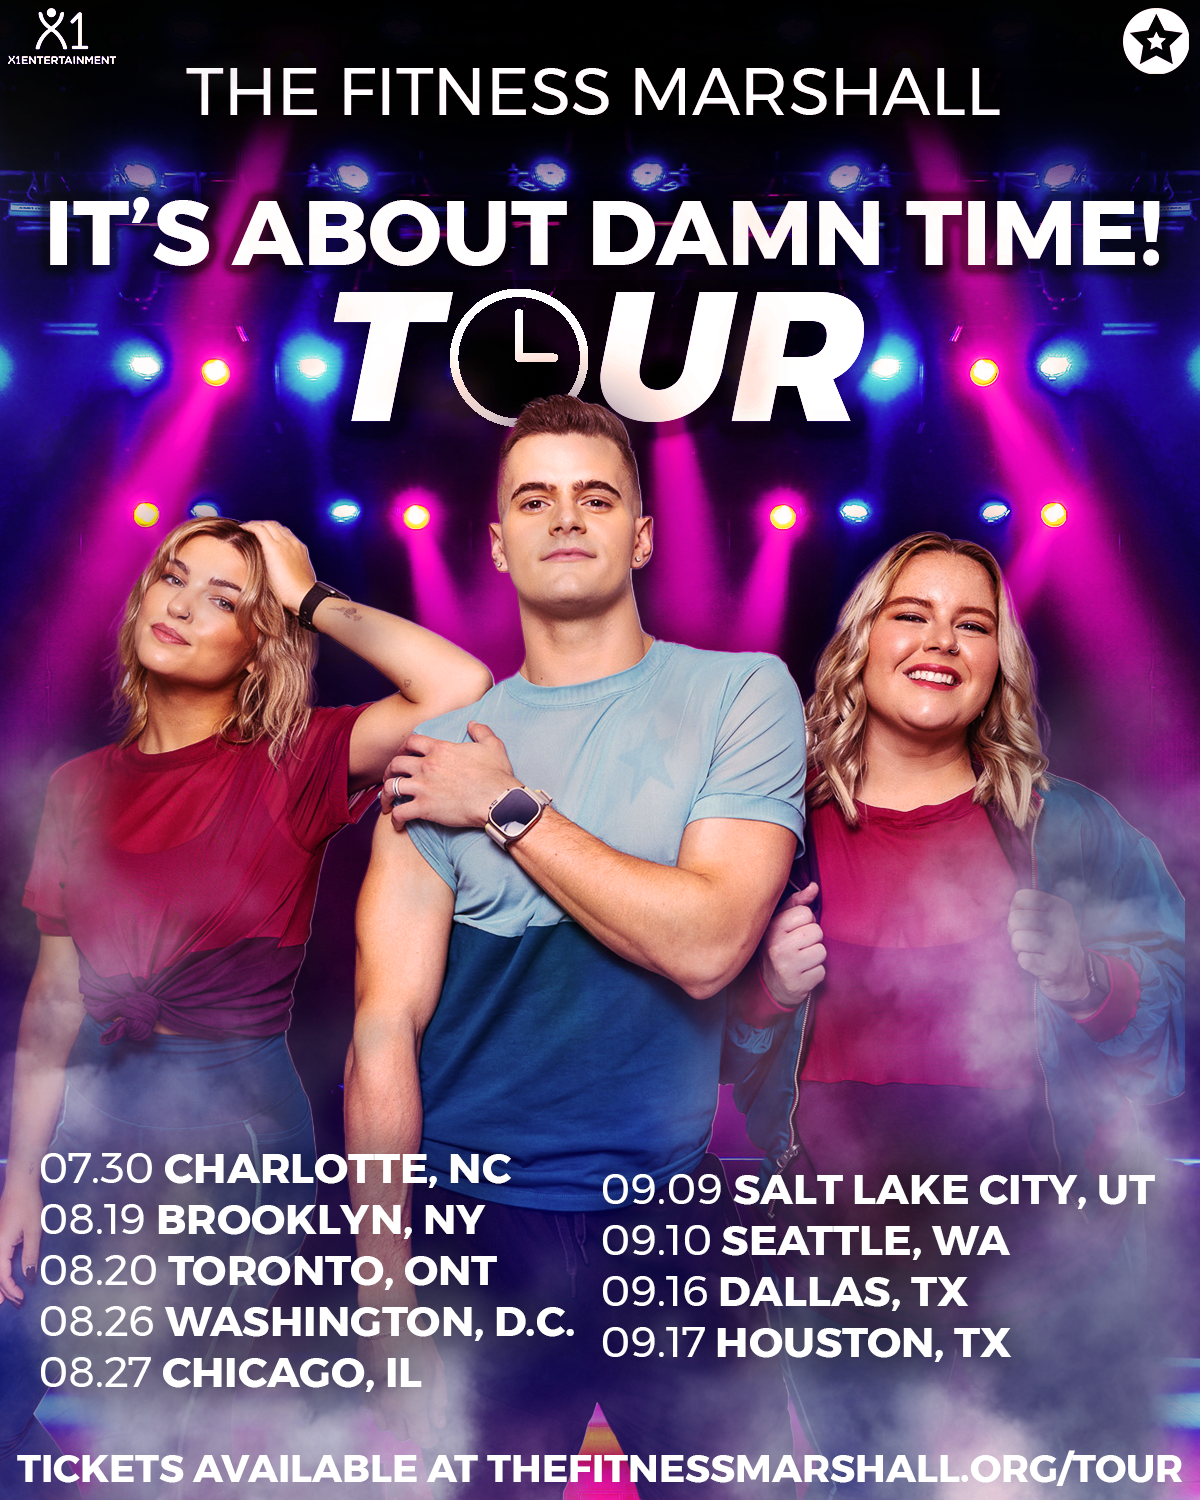 ITS ABOUT DAMN TIME TOUR!! — The Fitness Marshall